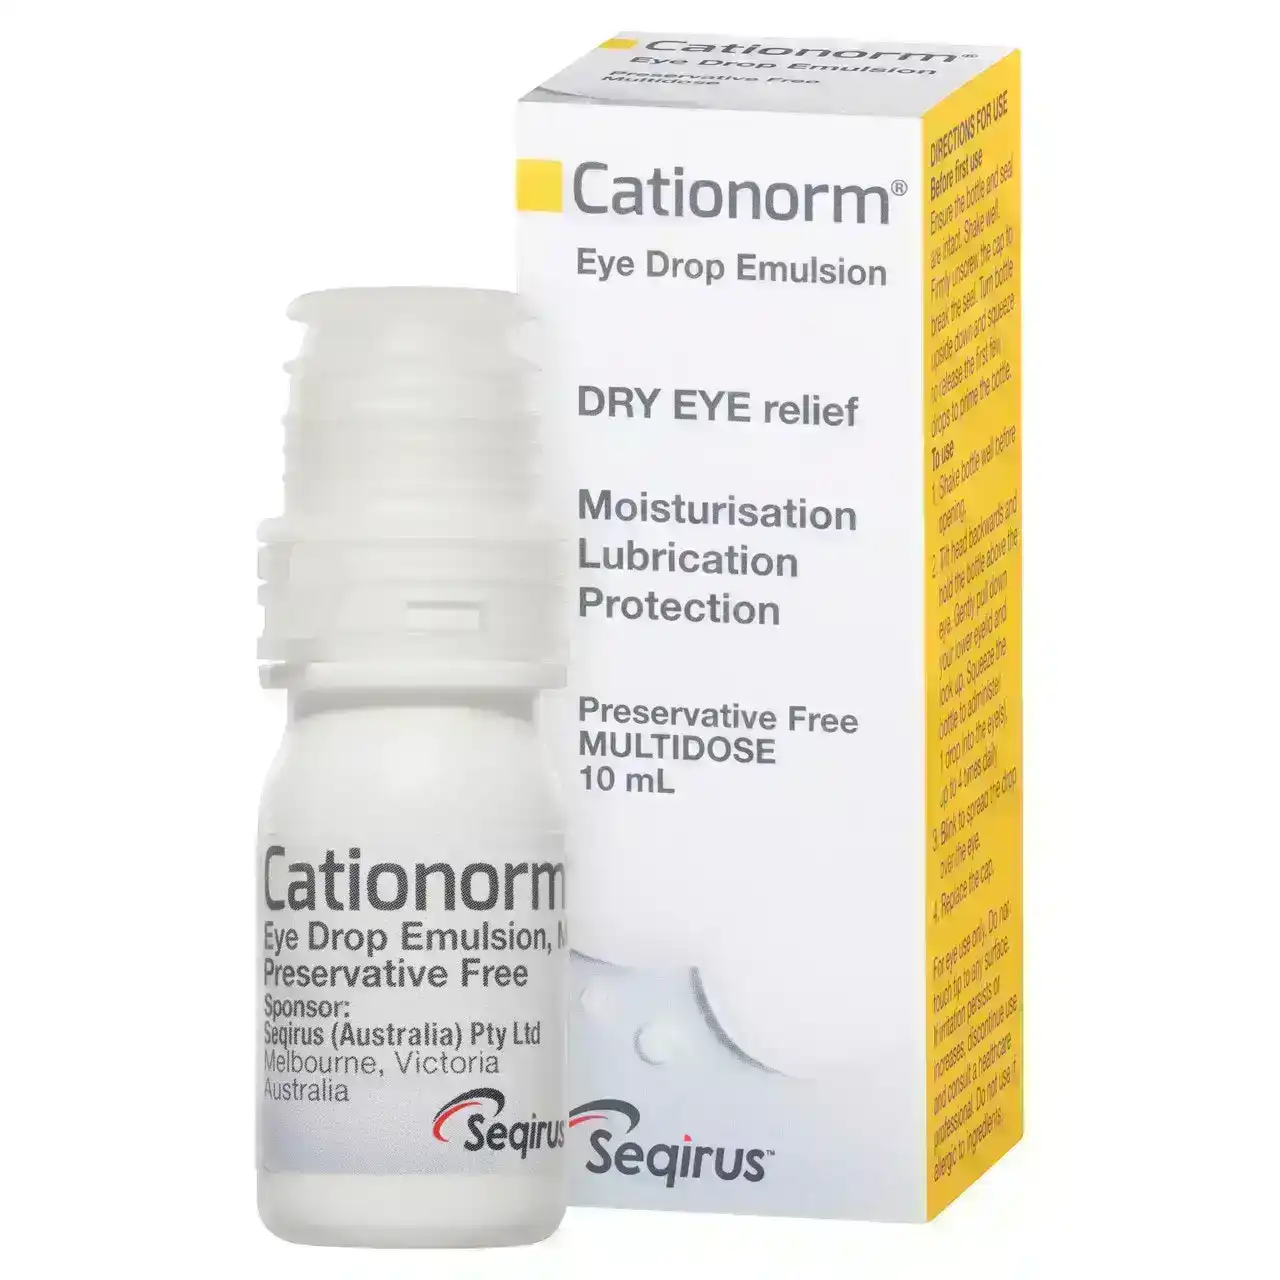 Cationorm Eye Drop Emulsion Dry Eye Relief 10mL